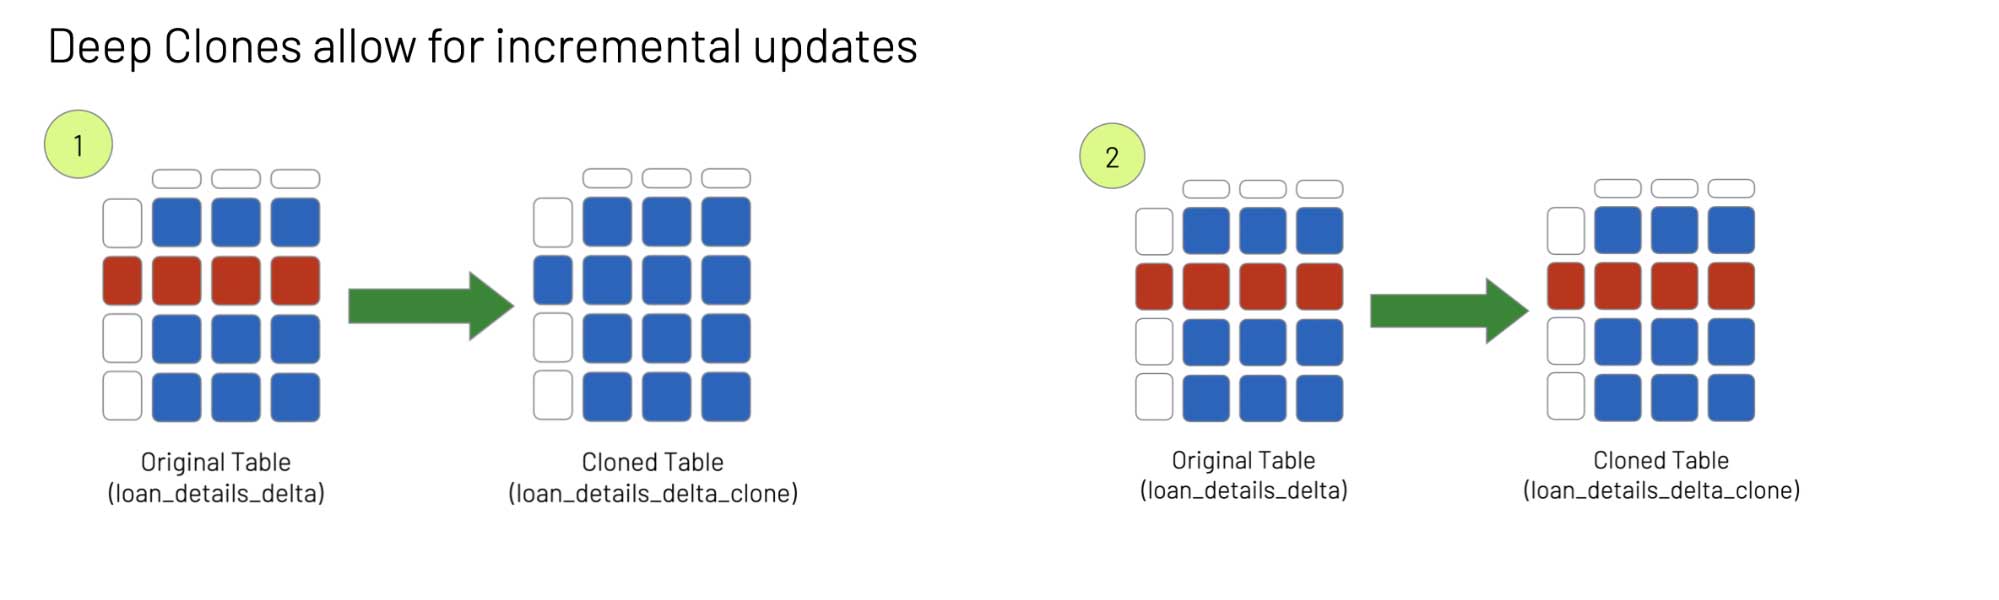 Deep Delta cloned tables allow for incremental updates